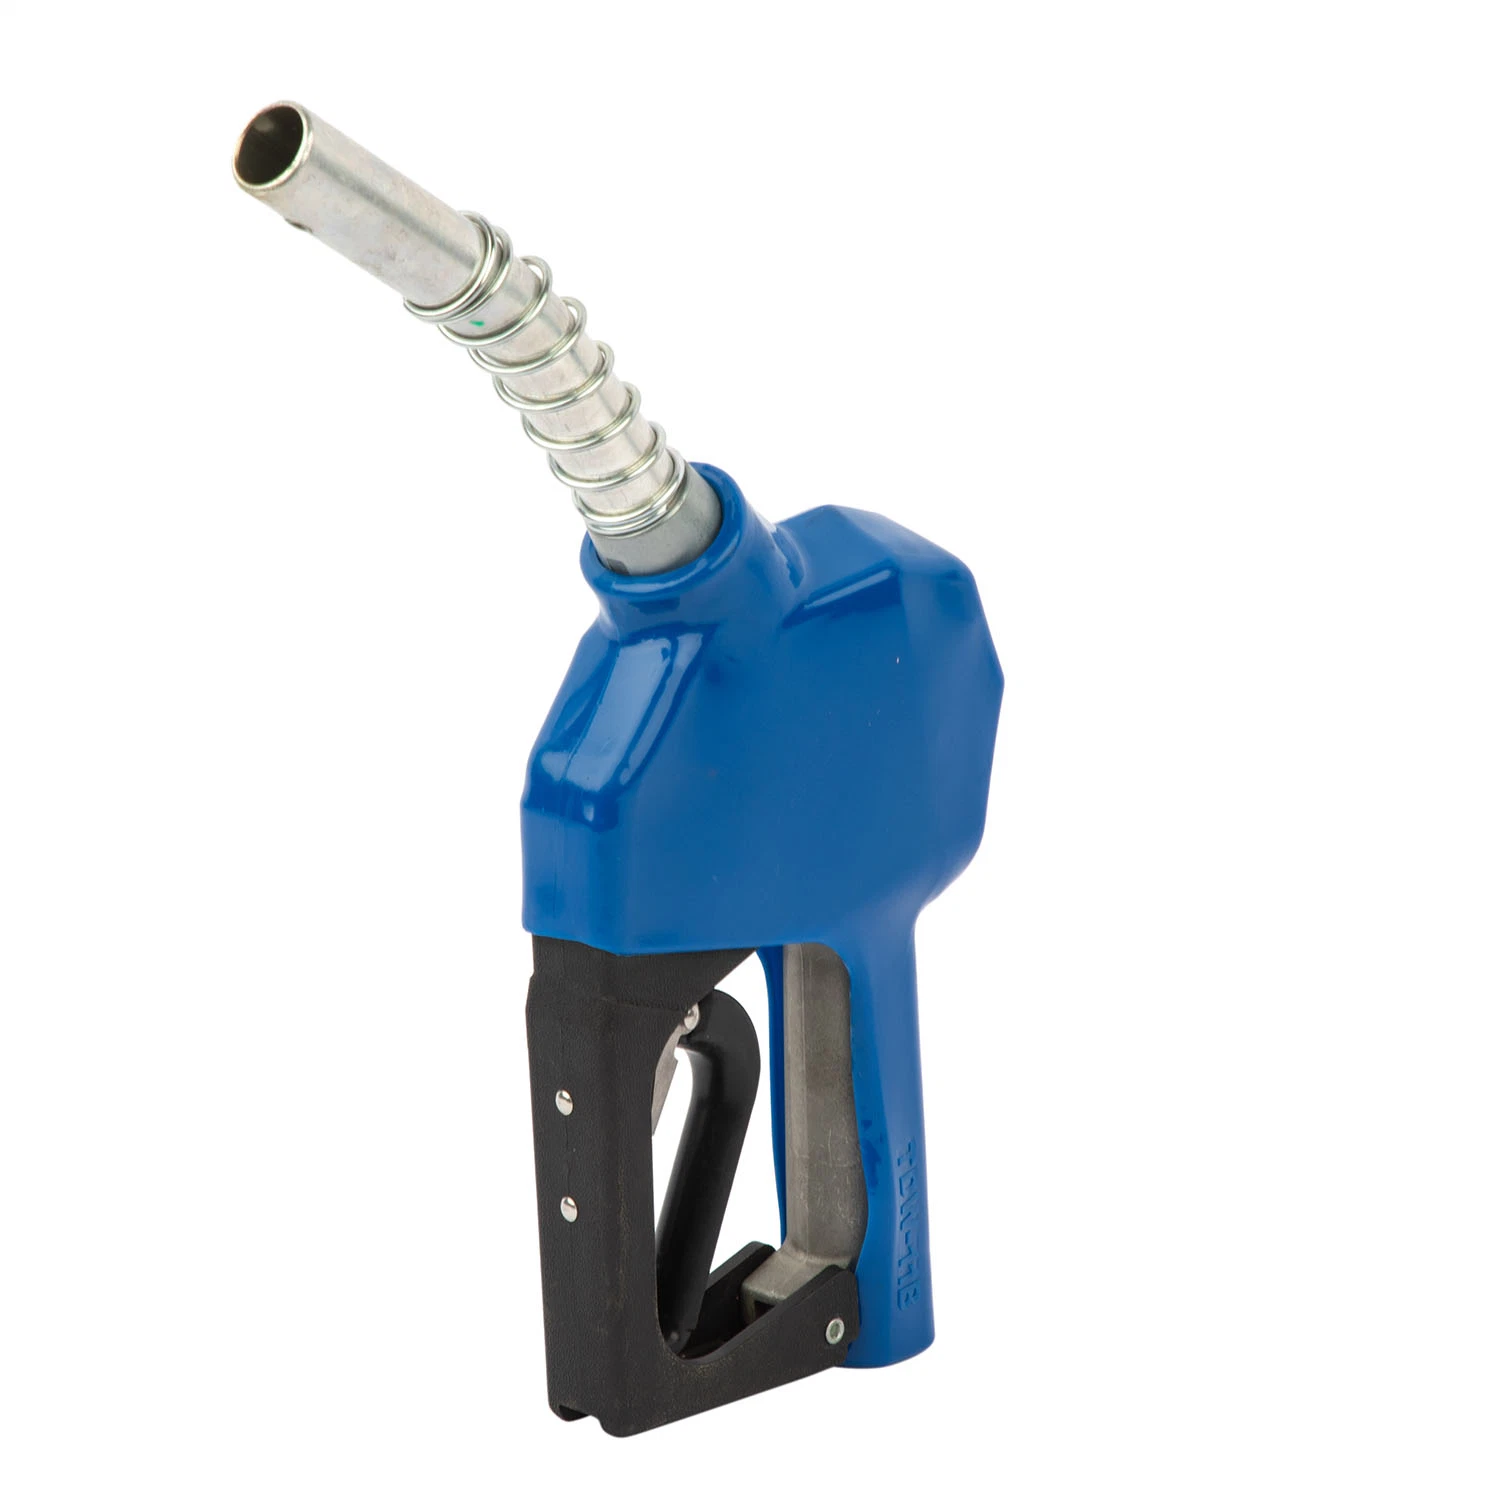 Diesel Oill Pump Car Parts Fuel Injector Nozzle for Filling Station